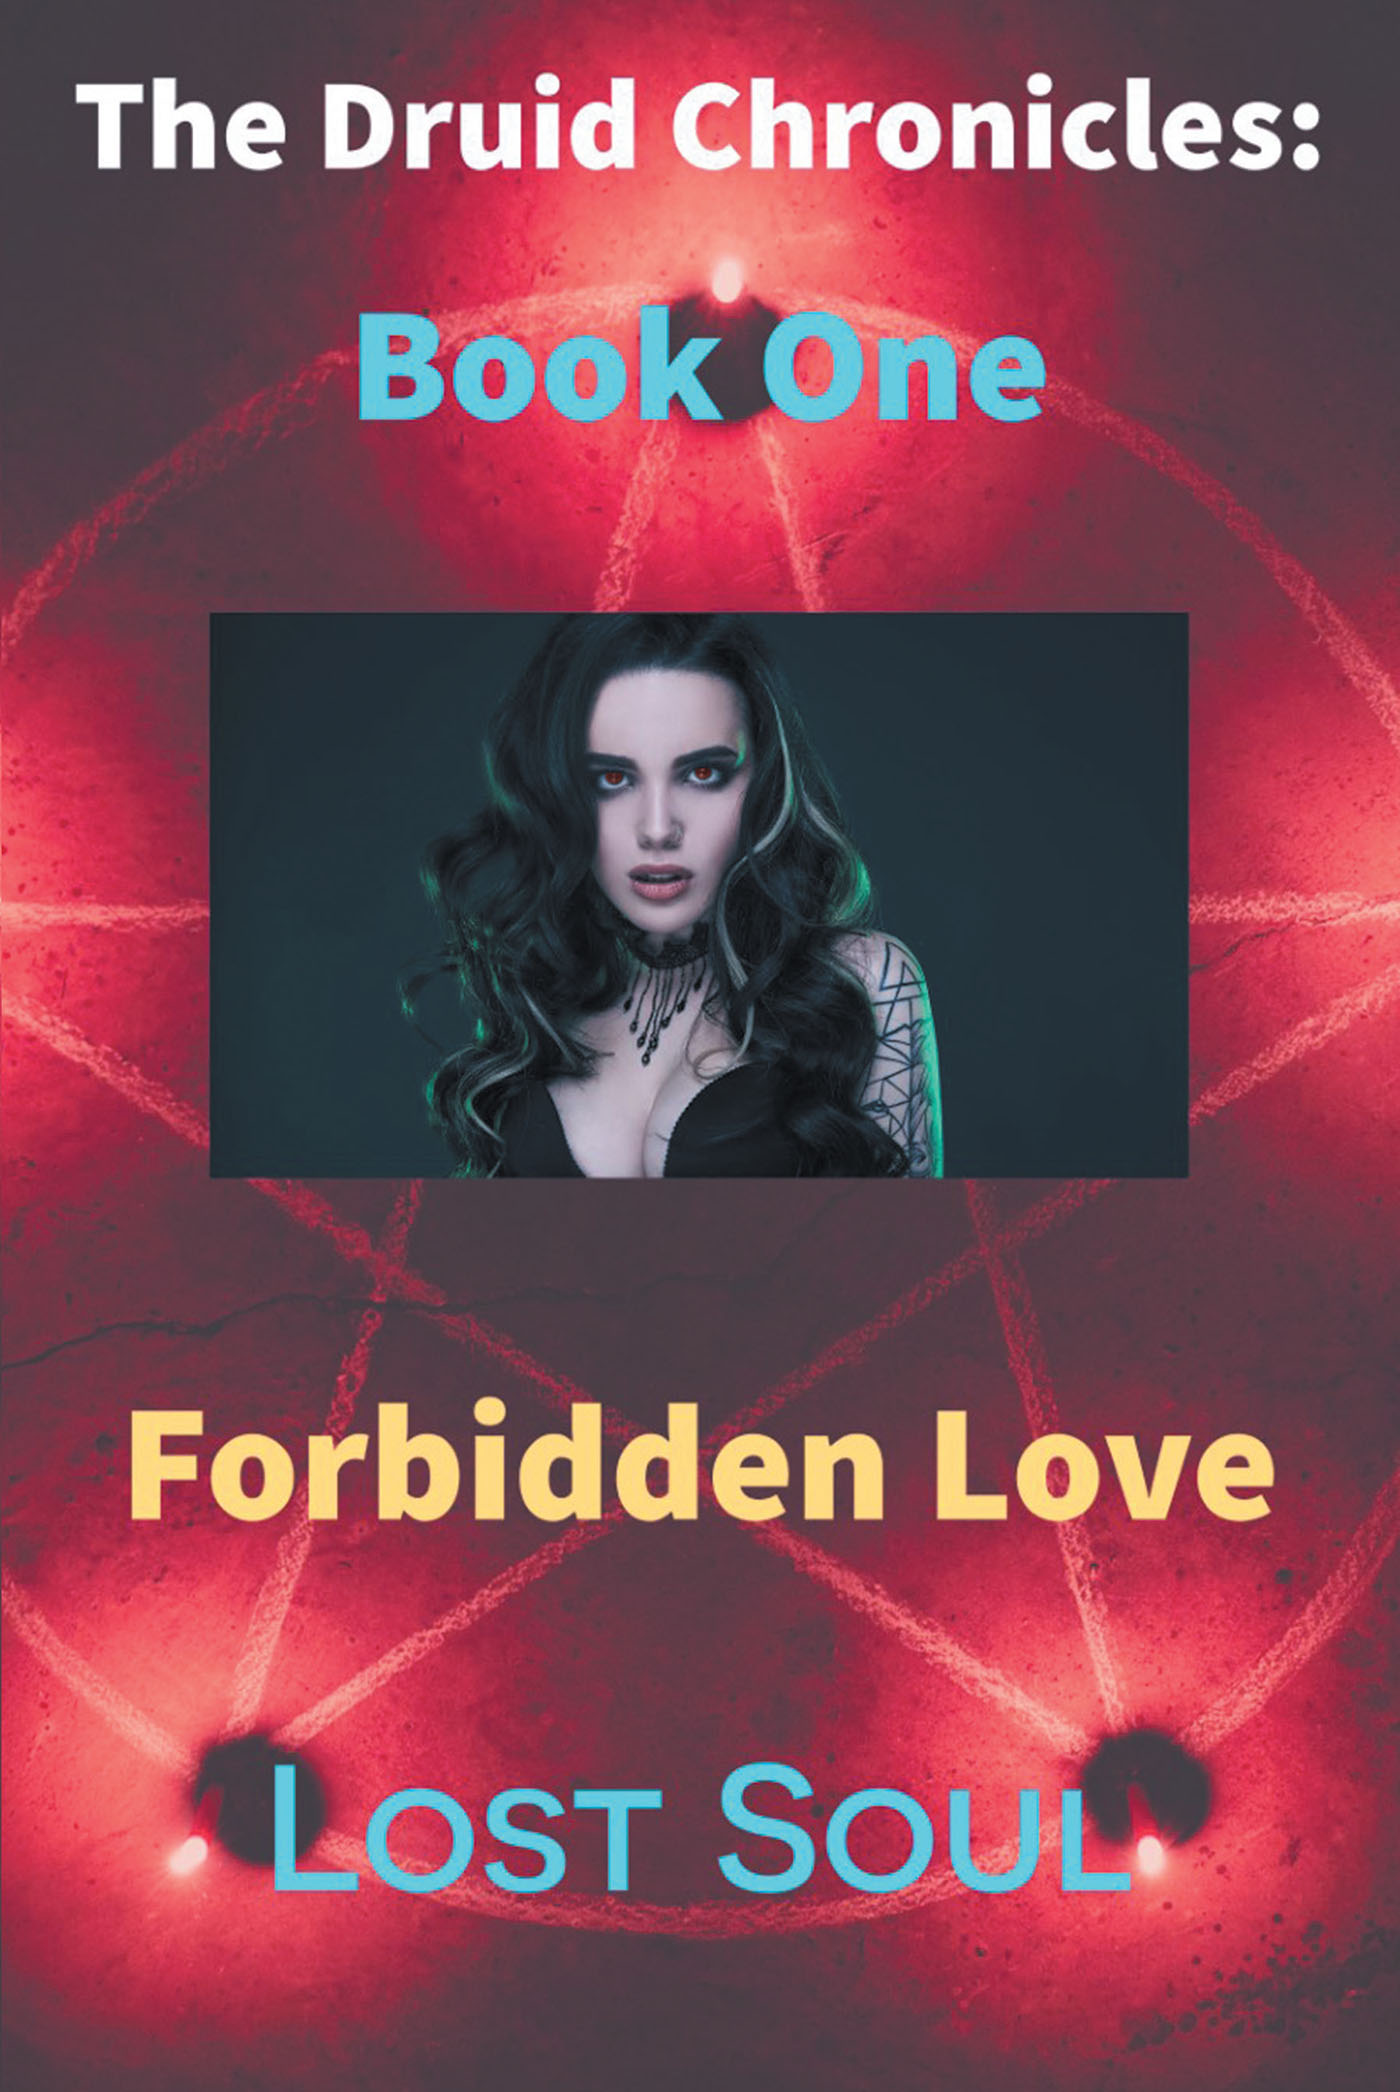 Lost Soul’s New Book, "The Druid Chronicles: Forbidden Love: Book One," Centers Around a Police Sergeant Who Finds Herself Entangled in an Affair with a Demon